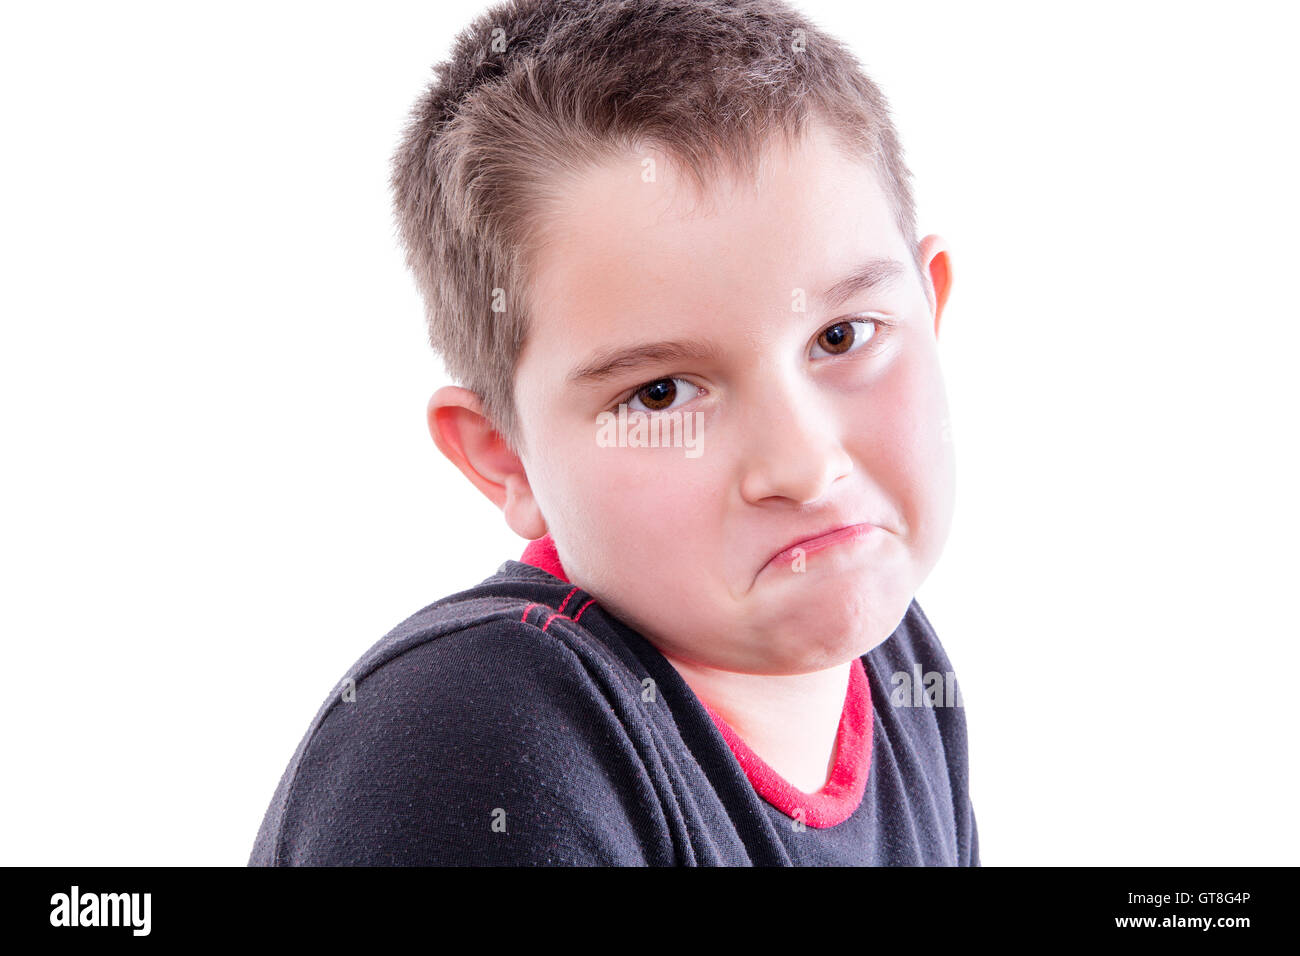 Head and Shoulders Close Up Portrait of Young Boy with Brown Eyes Looking at Camera with Down Turned Mouth in Studio with White Stock Photo